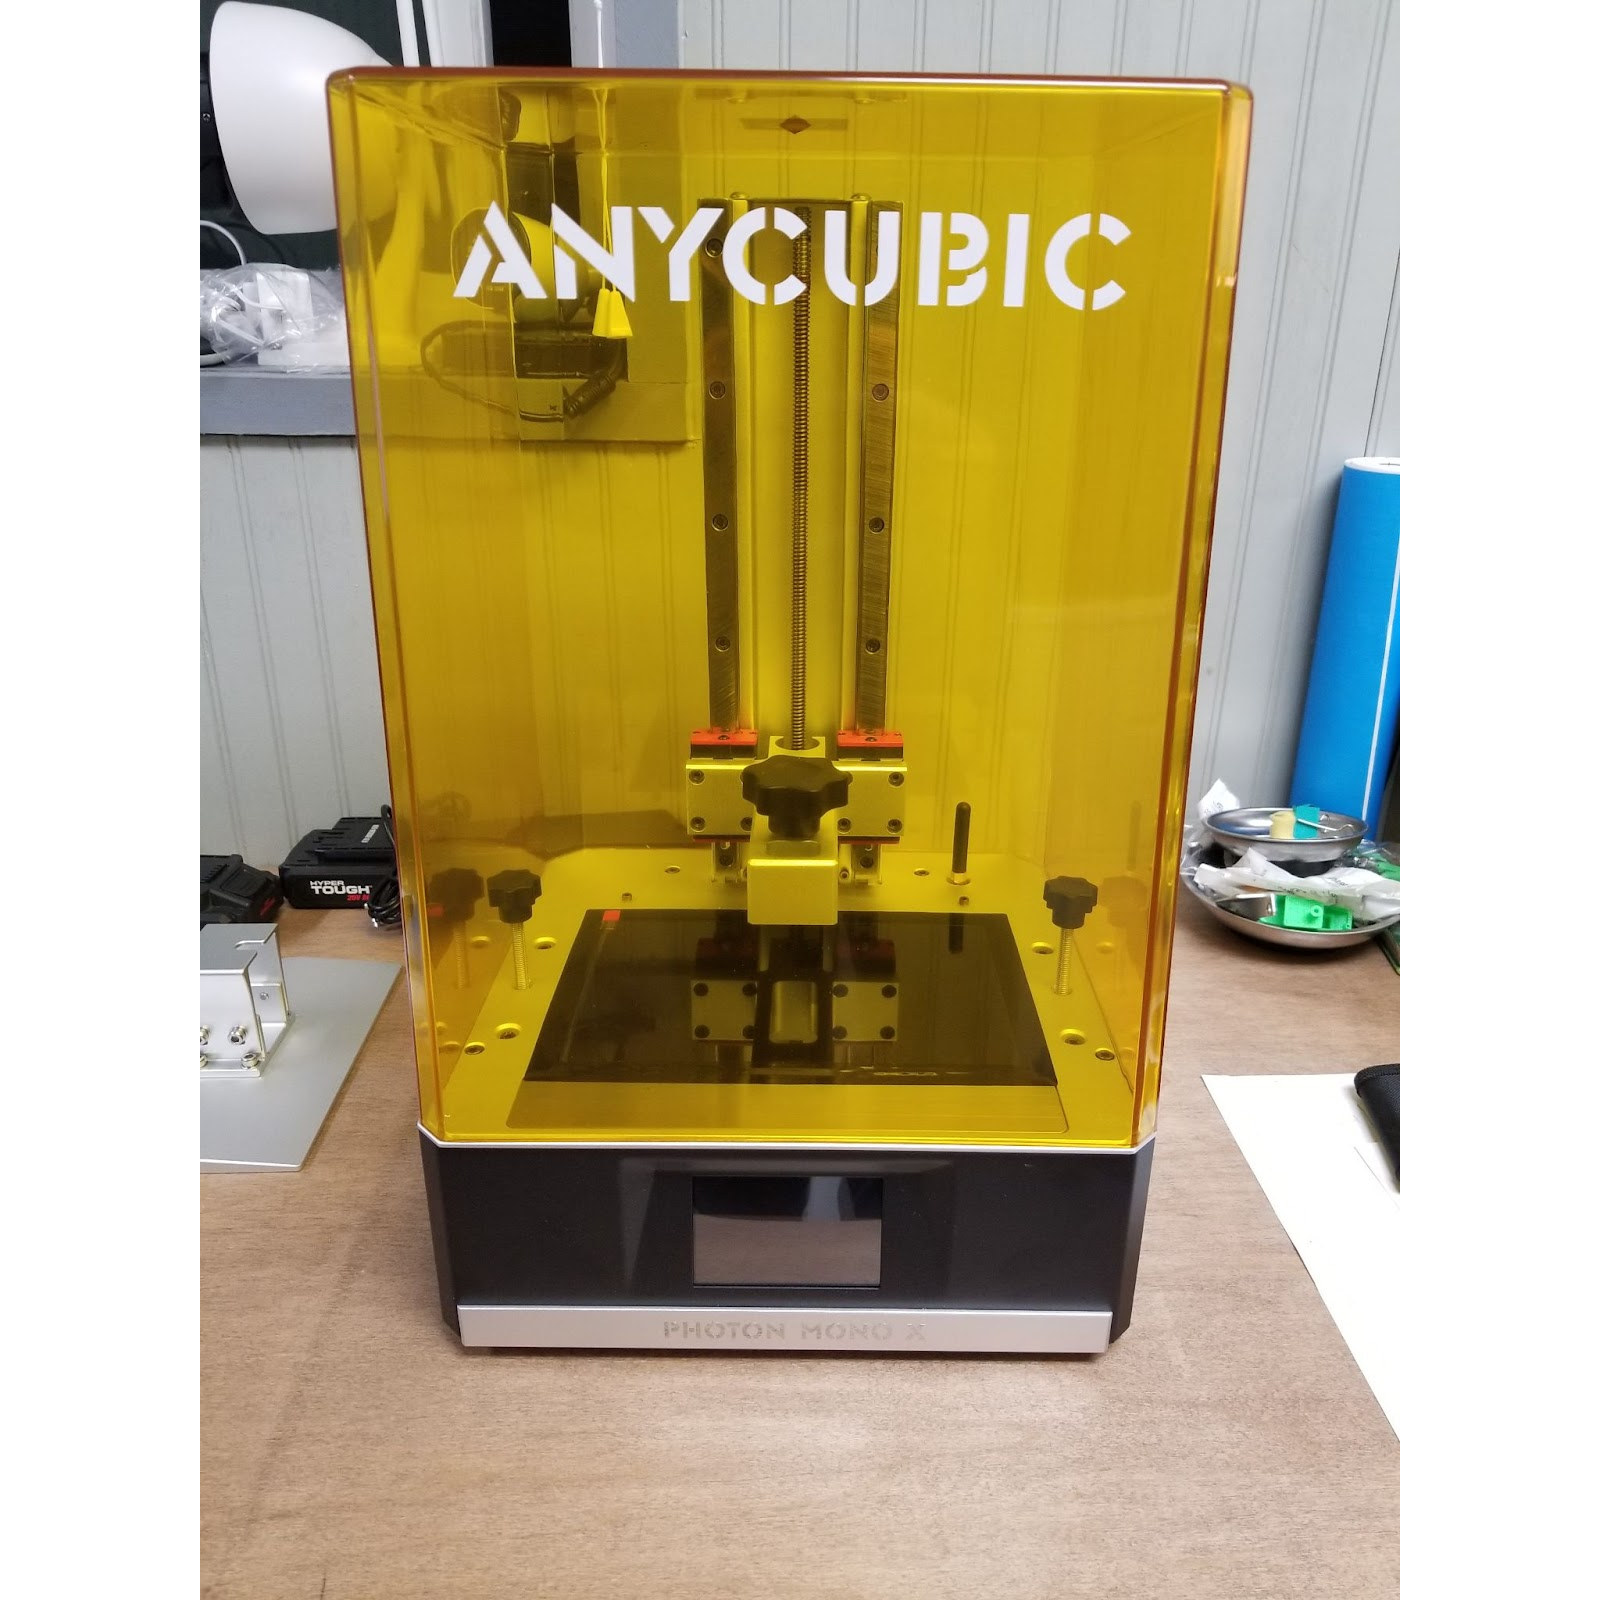 Anycubic 3d Printer Wash Cure, Anycubic Photon 3d Printer